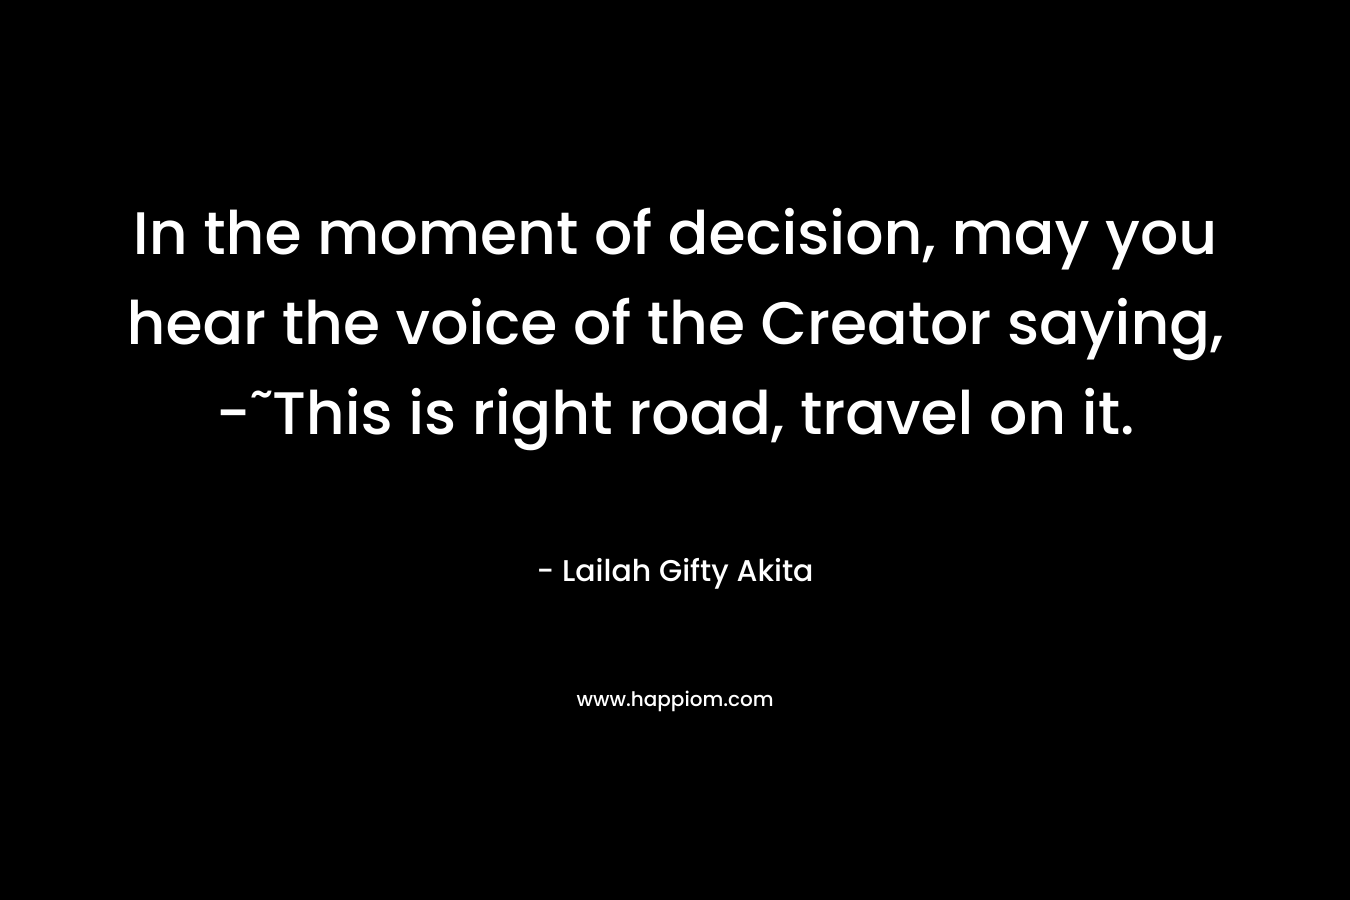 In the moment of decision, may you hear the voice of the Creator saying, -˜This is right road, travel on it.